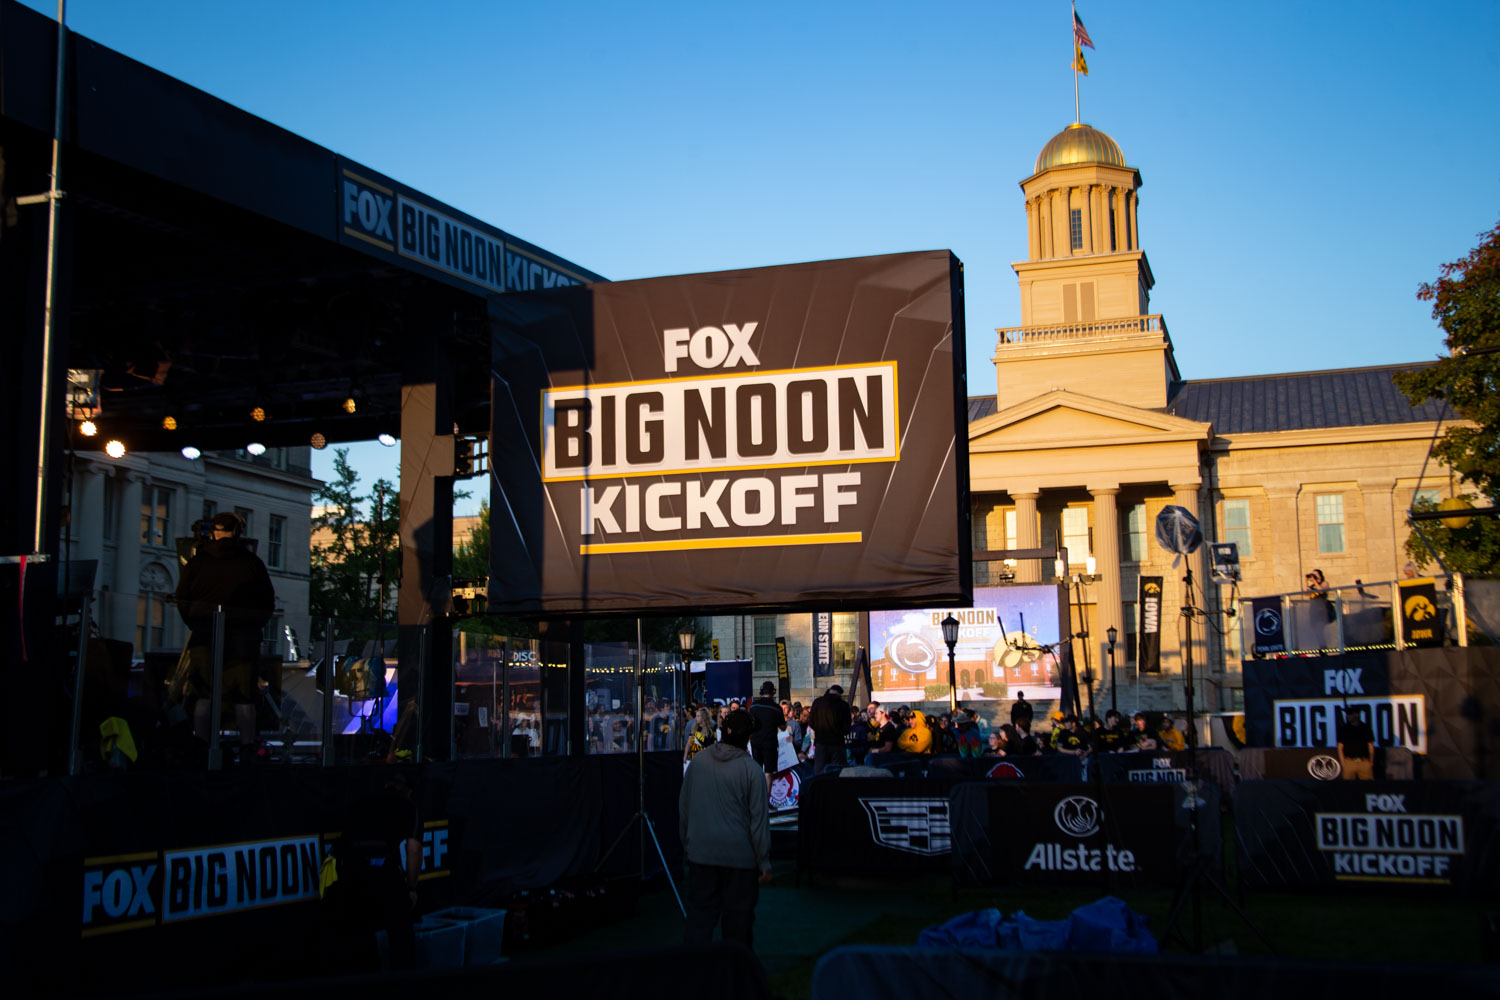 Highlights from FOX's Big Noon Kickoff pregame show in Iowa City The